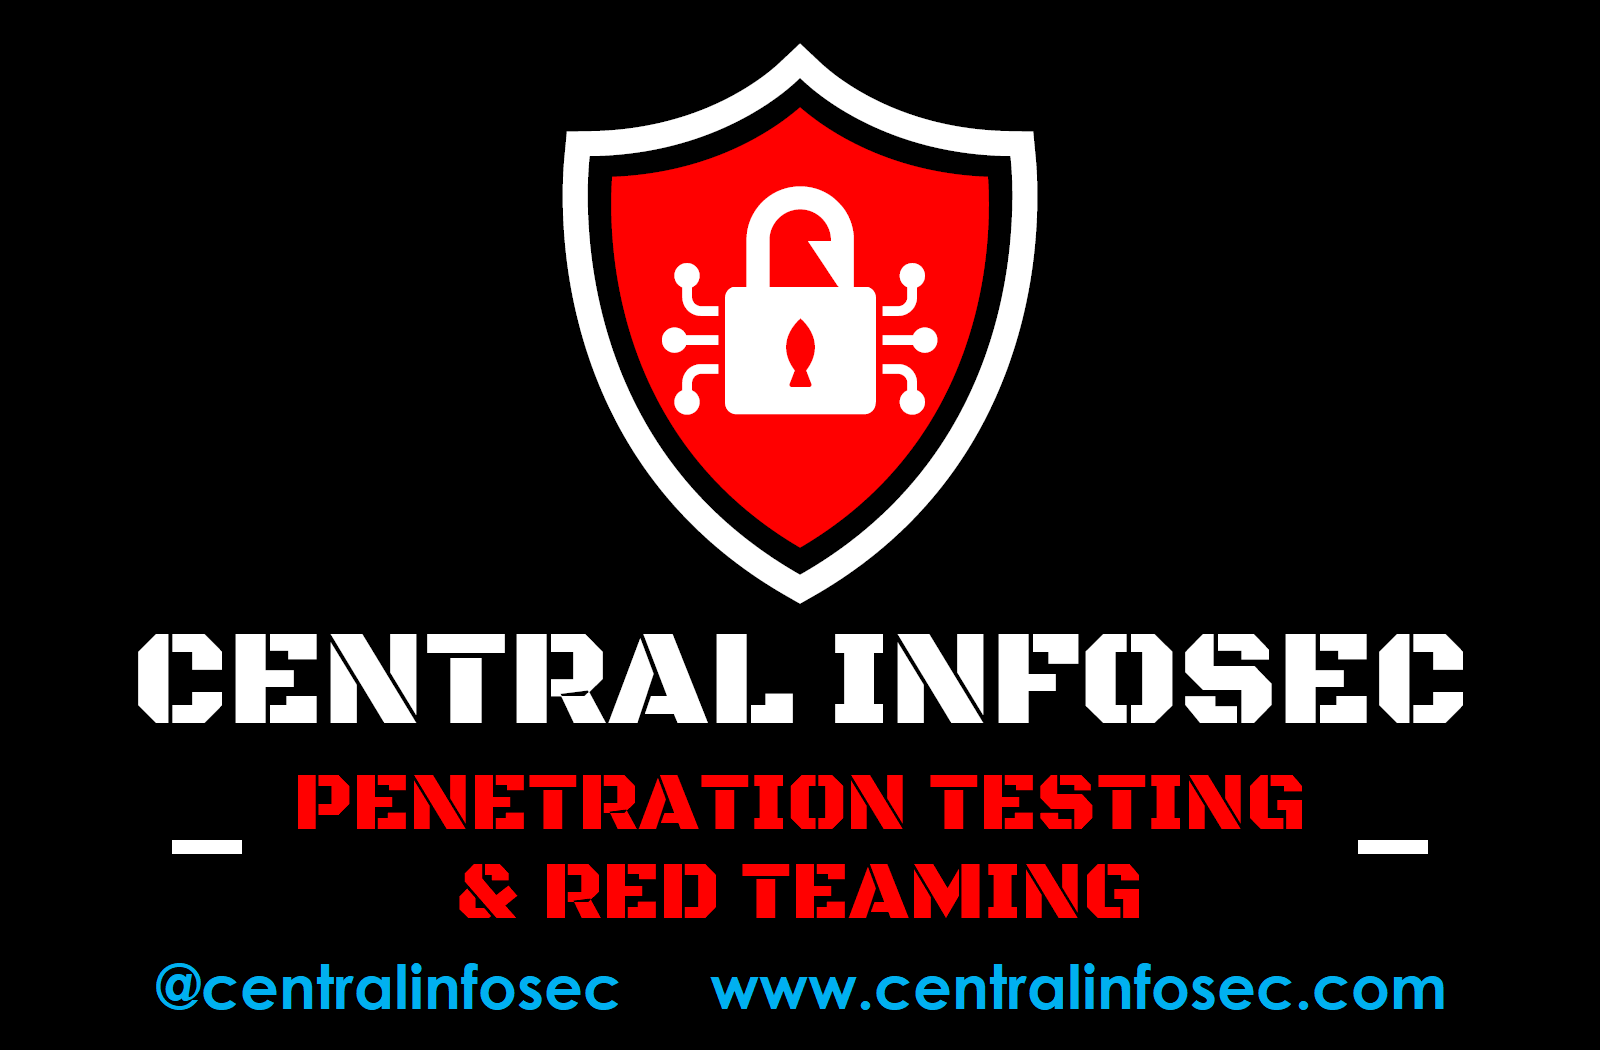 Central InfoSec Best Boutique Penetration Testing Firm - Top Rated Red Team Companies